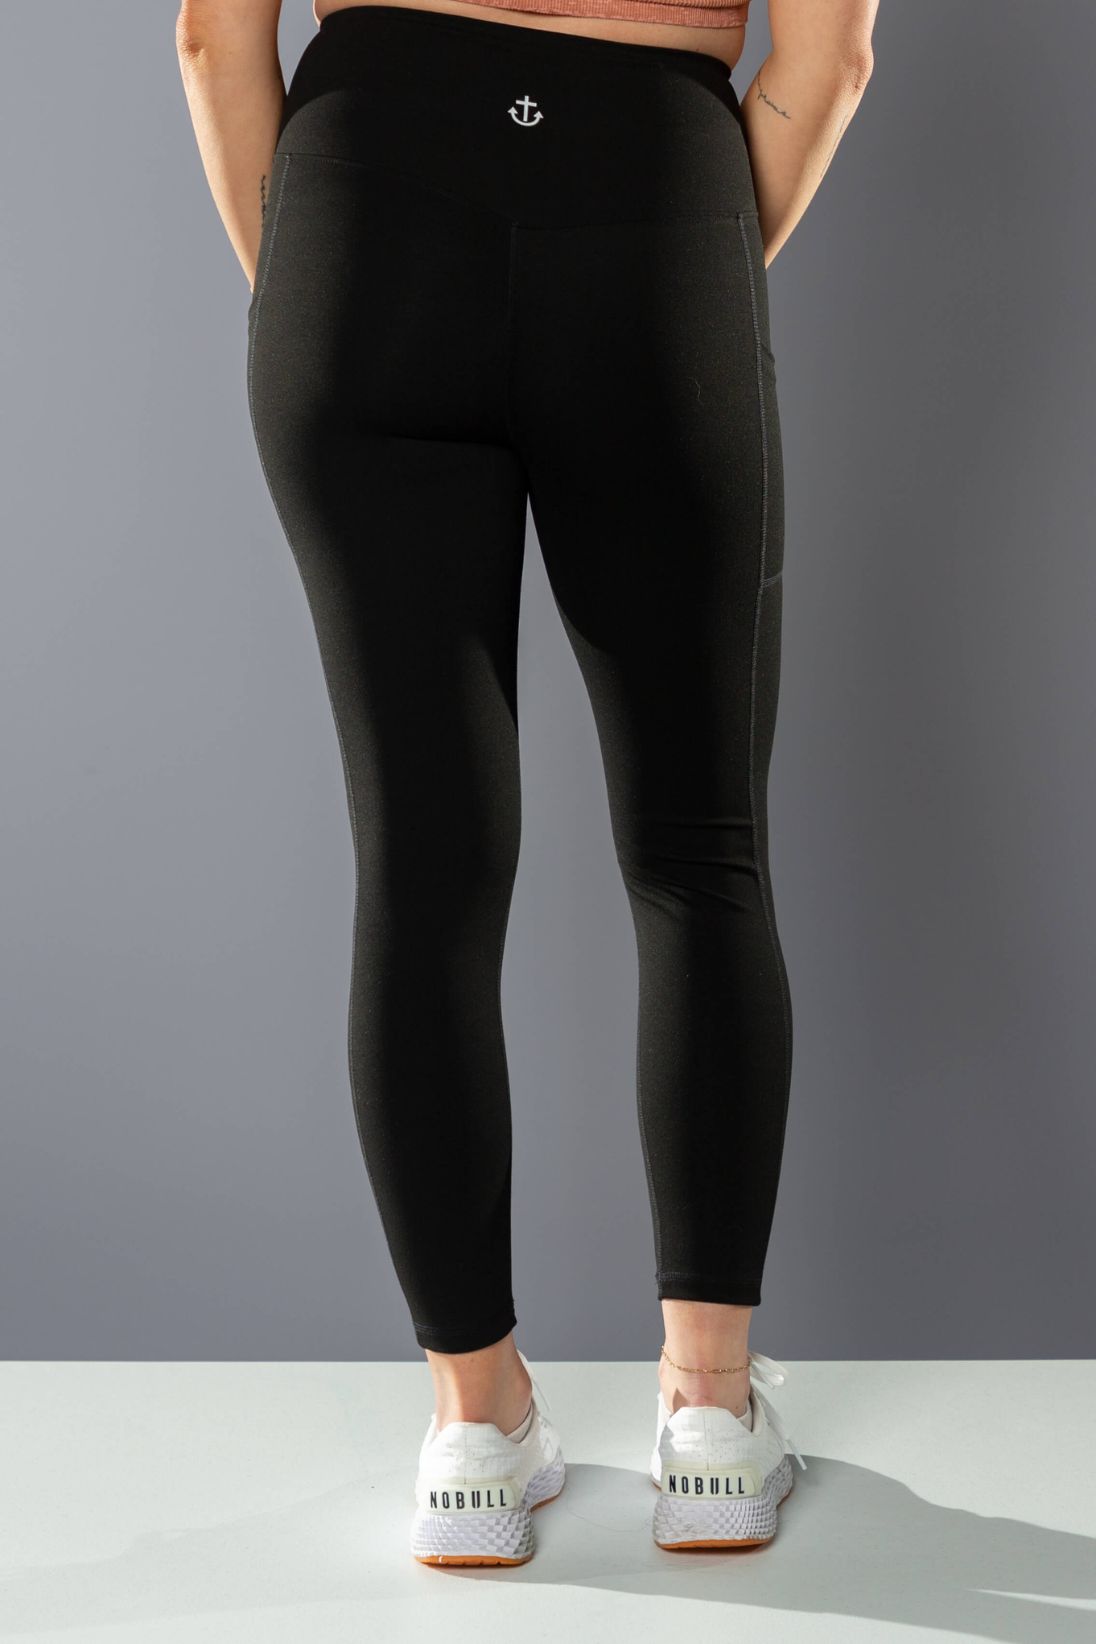 High Waisted Black Athletic Leggings With Pockets